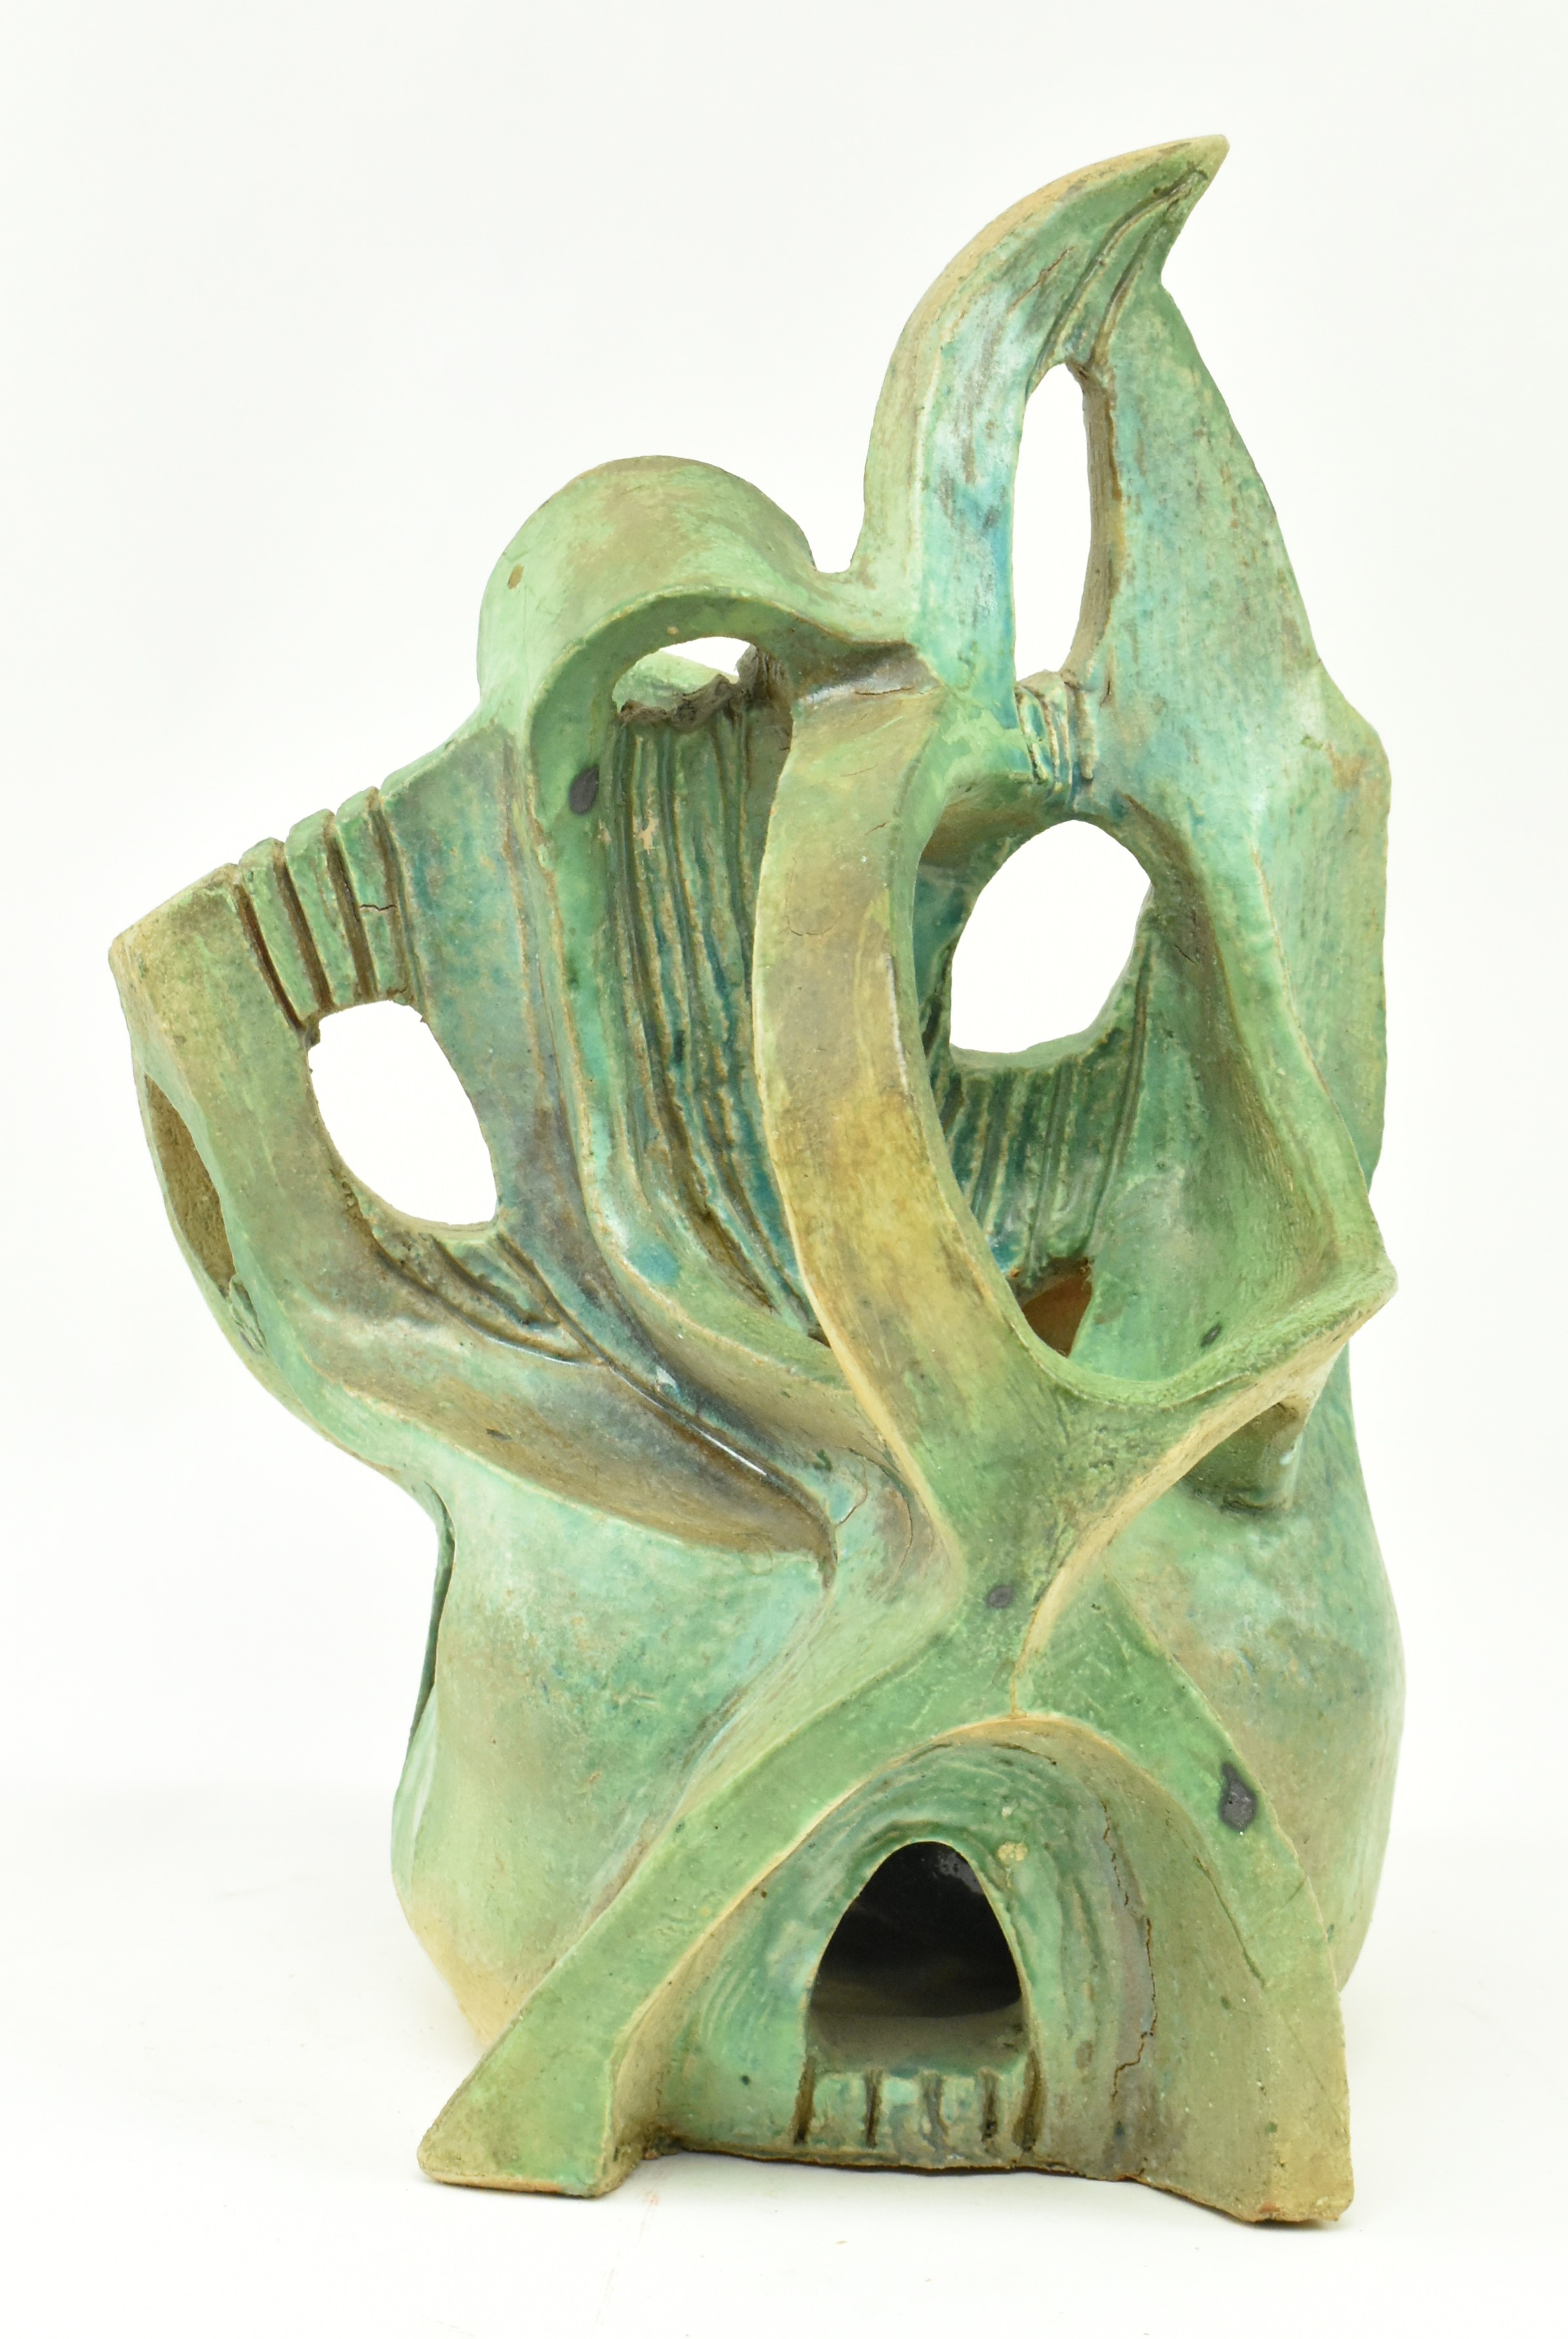 VINTAGE 20TH CENTURY STUDIO ART POTTERY ABSTRACT SCULPTURE - Image 4 of 7